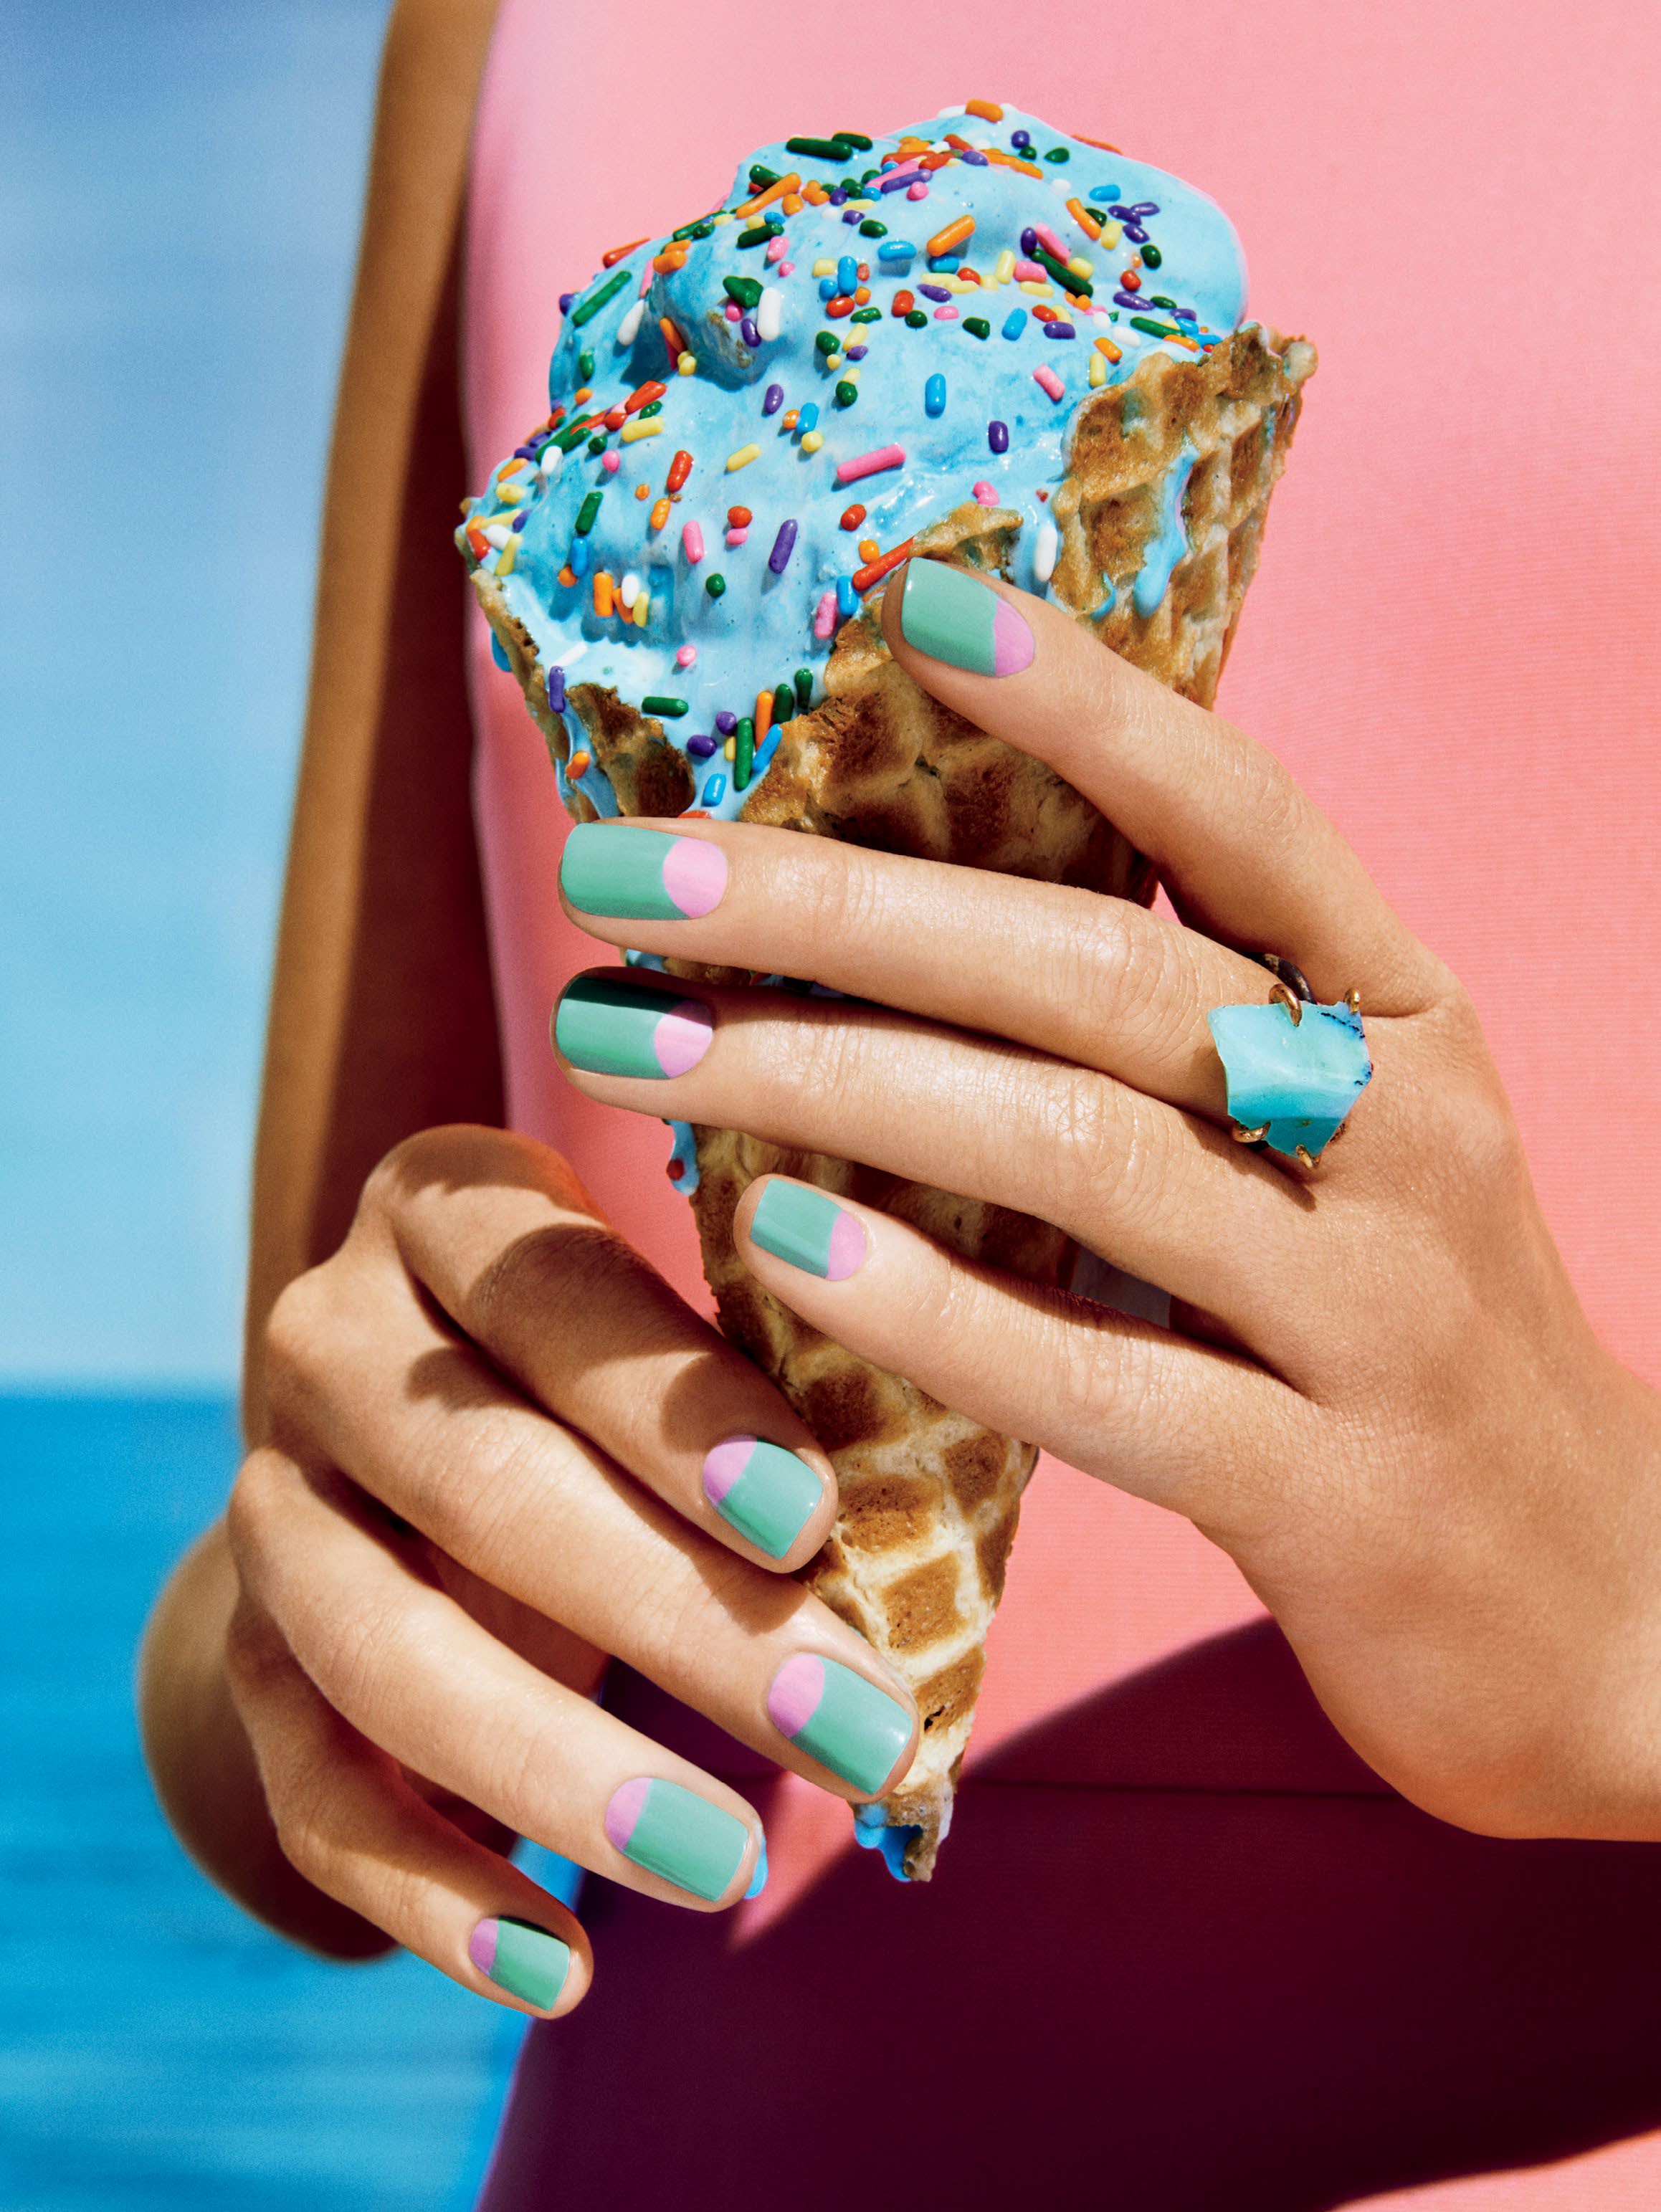 Food Ice Cream Hands Painted Nails Manicured Nails 2317x3086